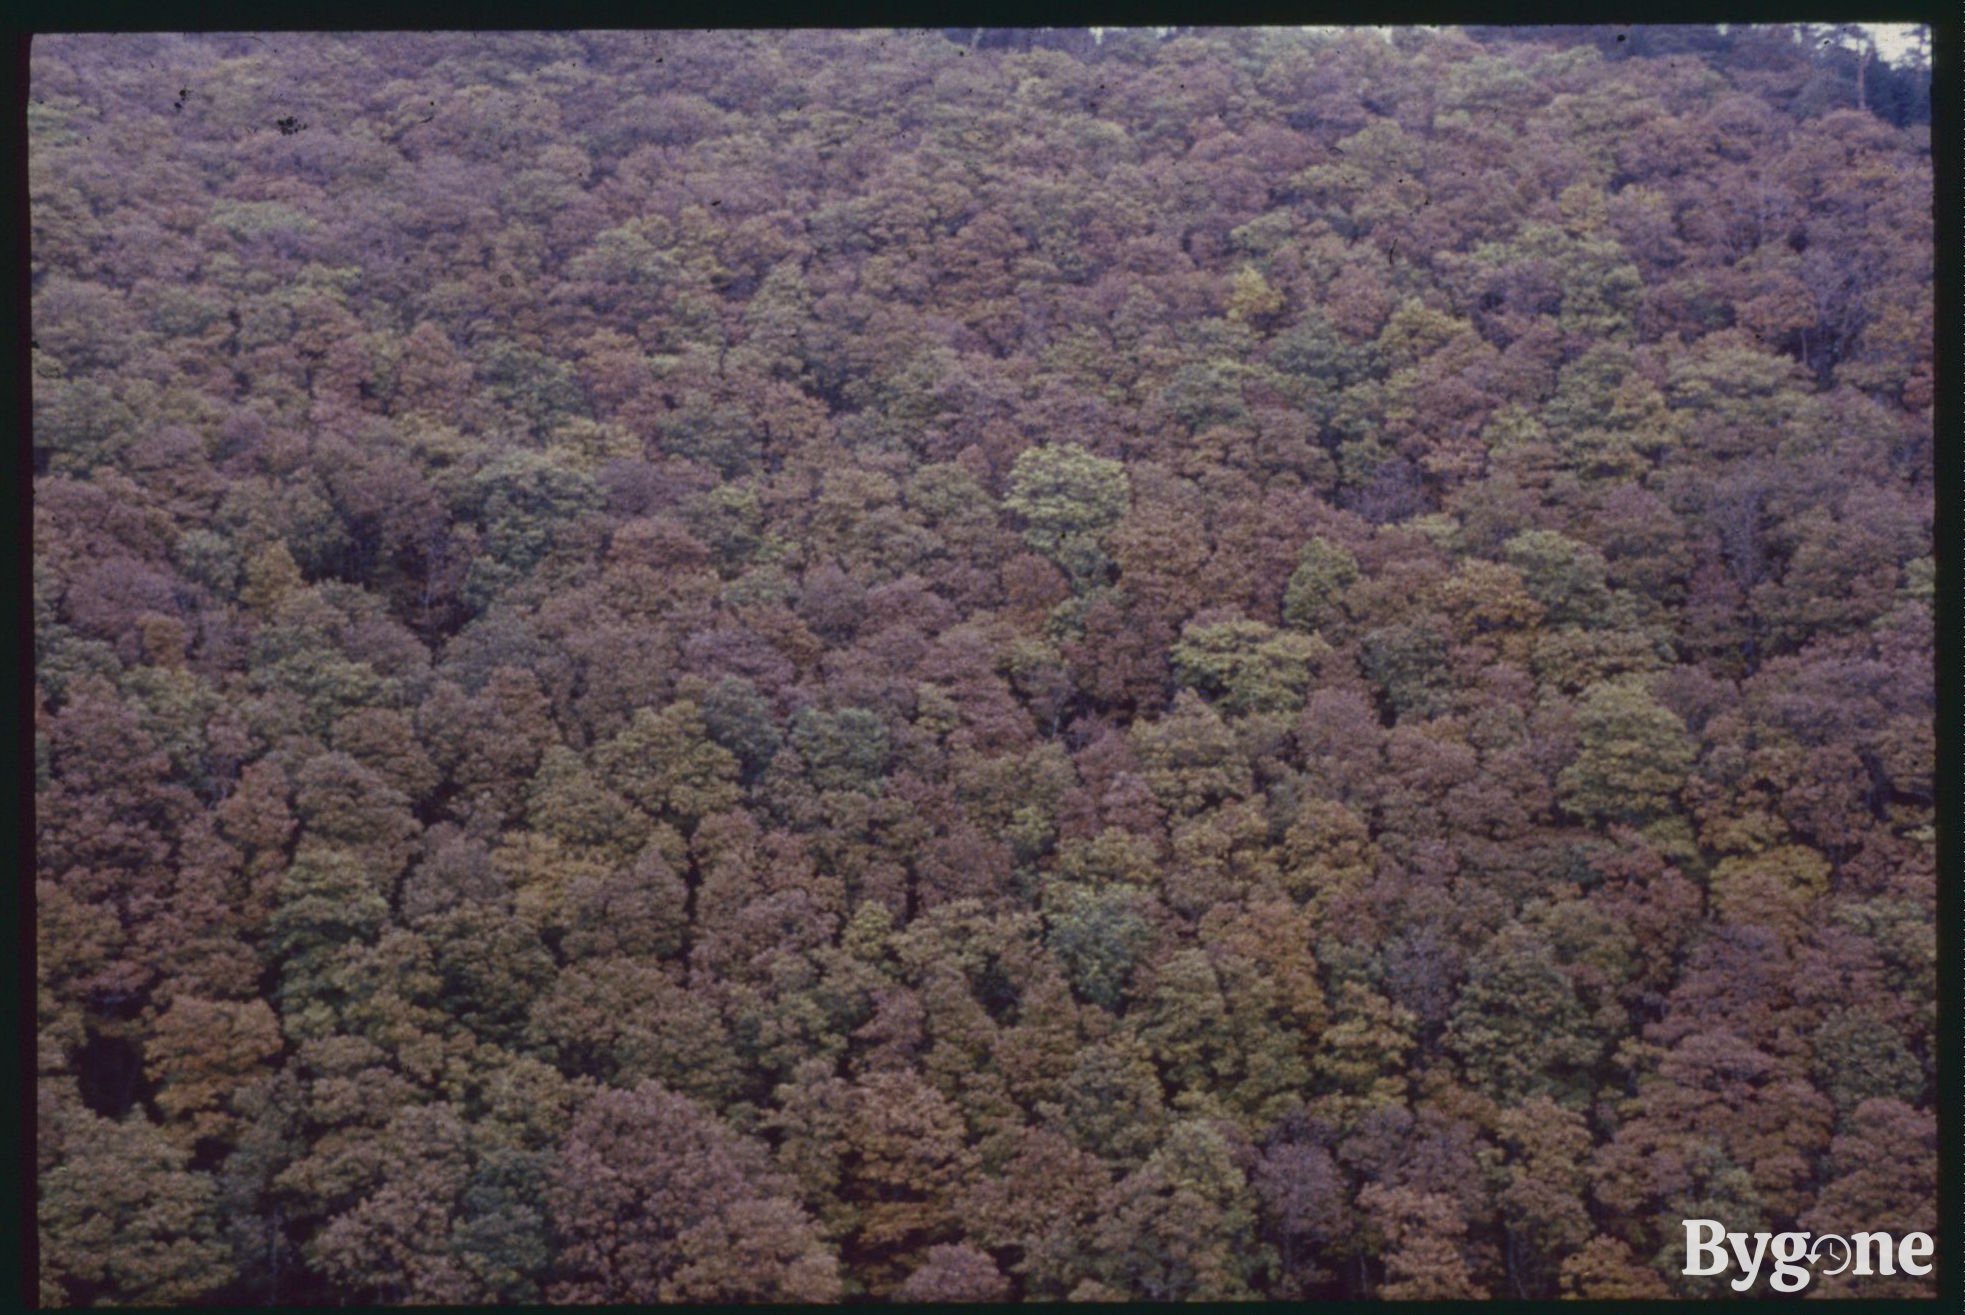 Aerial view of unknown forest - Growing Concerns